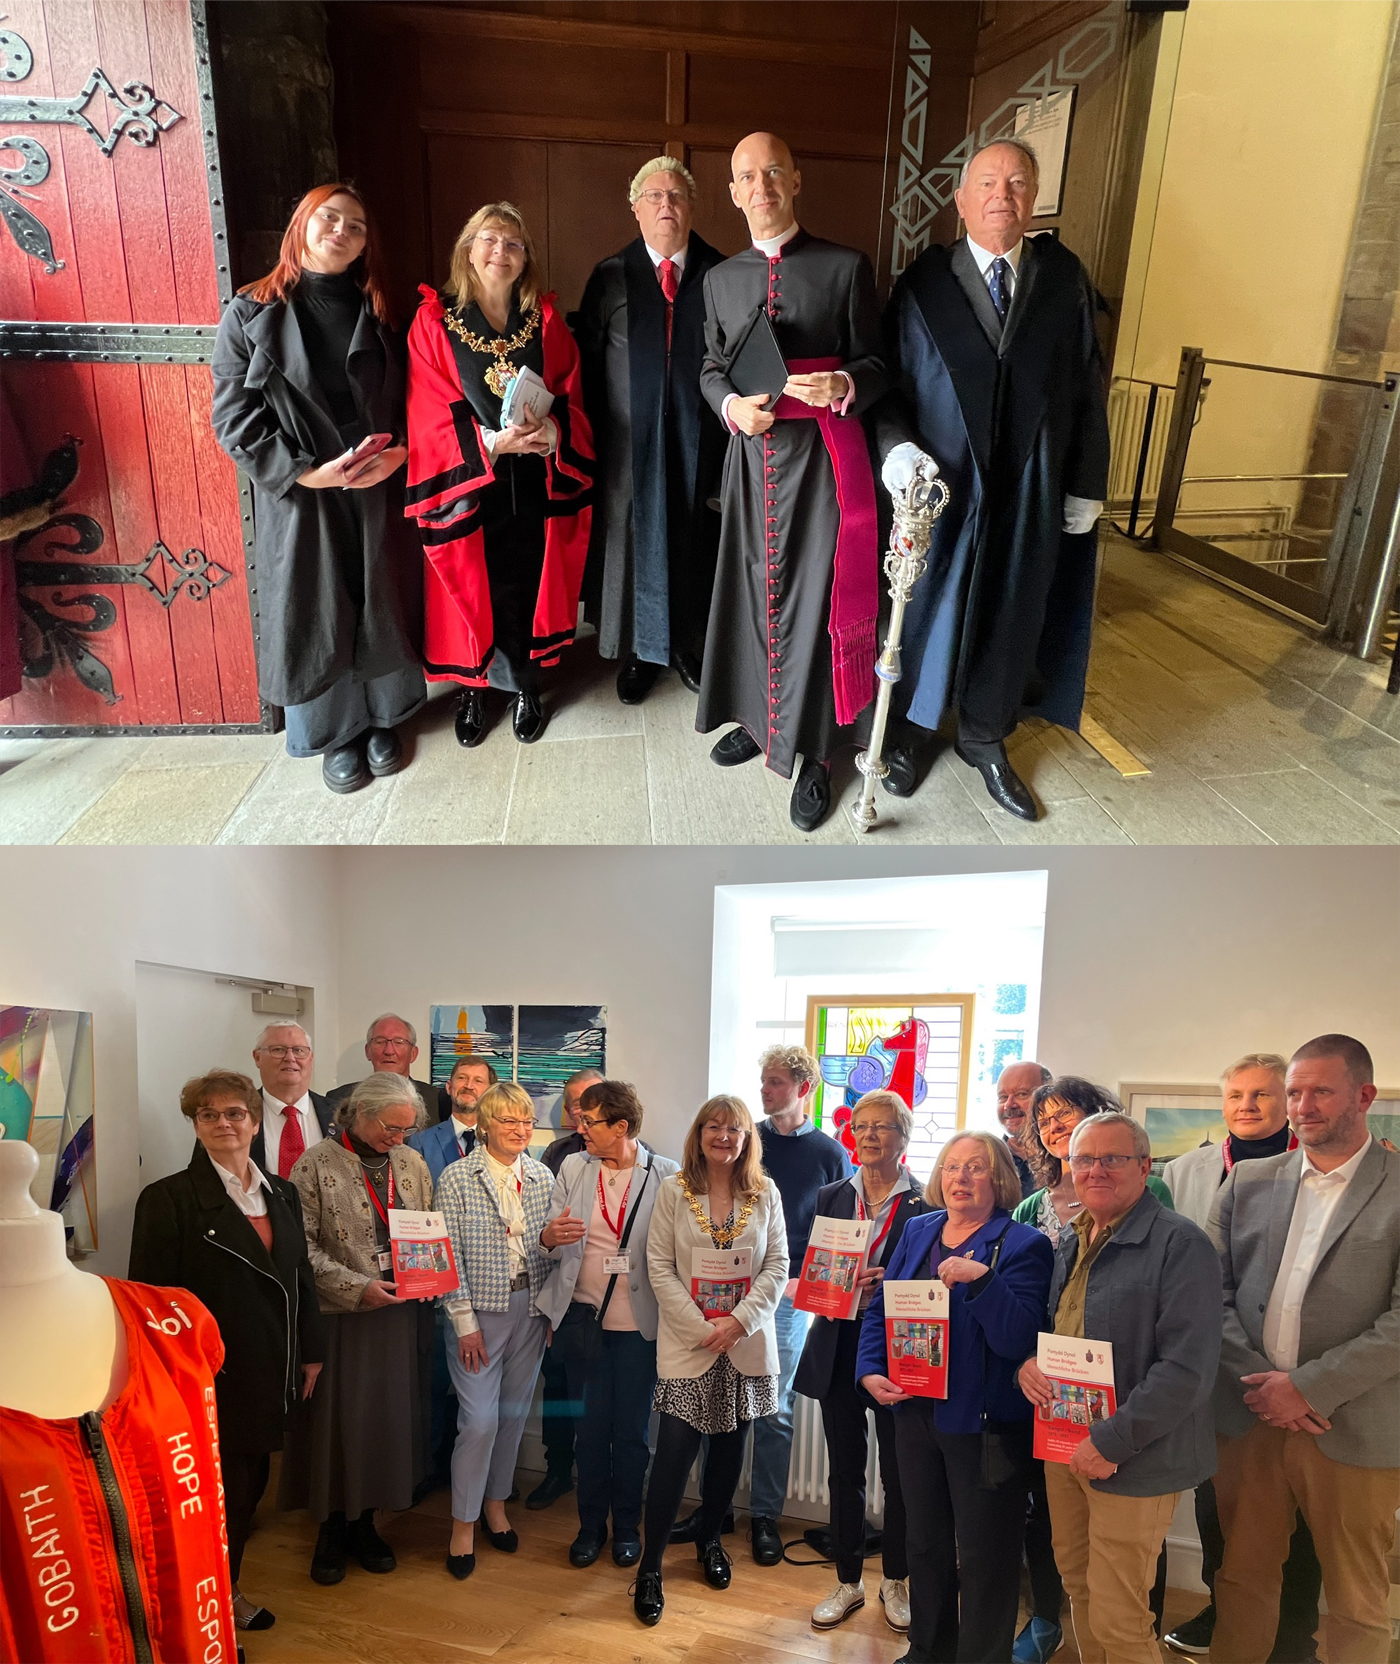 Recently a group of Soest people visited Bangor. The city of Soest in West Germany is twinned with the city of Bangor and celebrates the 50th anniversary of the twinning this year. 50 years of friendship between the citizens of the two cities!